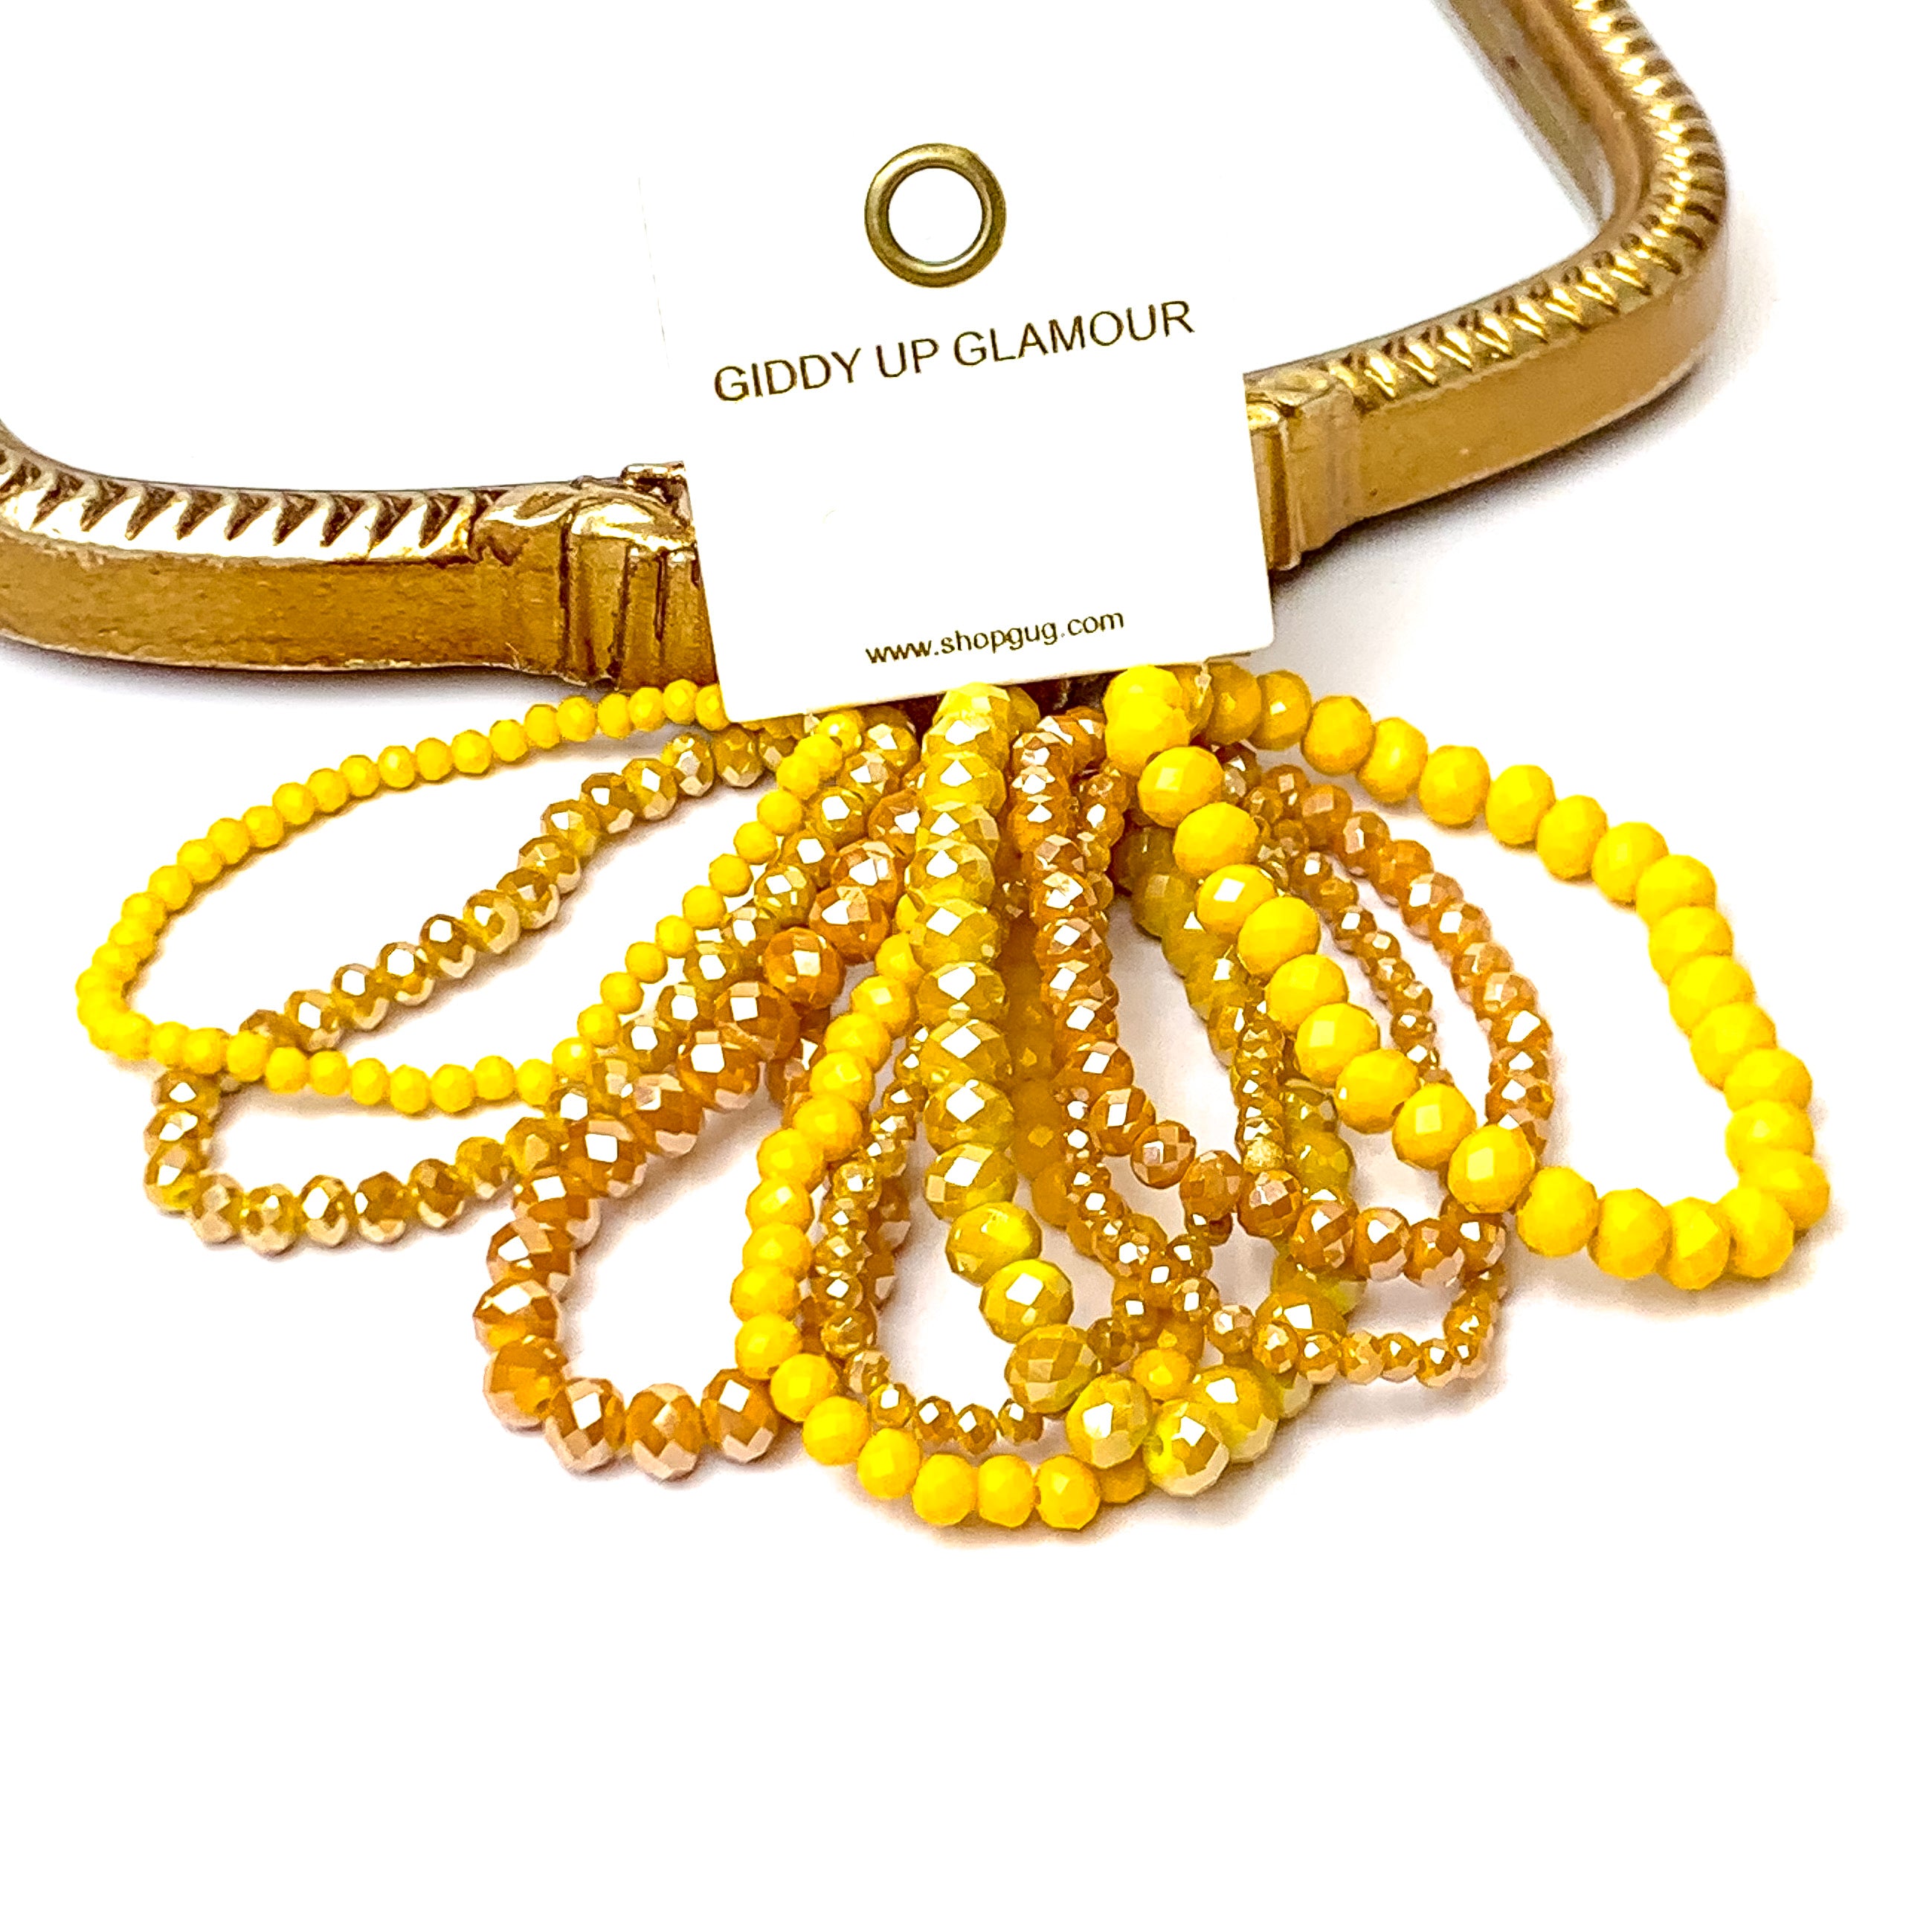 Nine Piece Crystal Bracelet Set in Mustard Yellow - Giddy Up Glamour Boutique